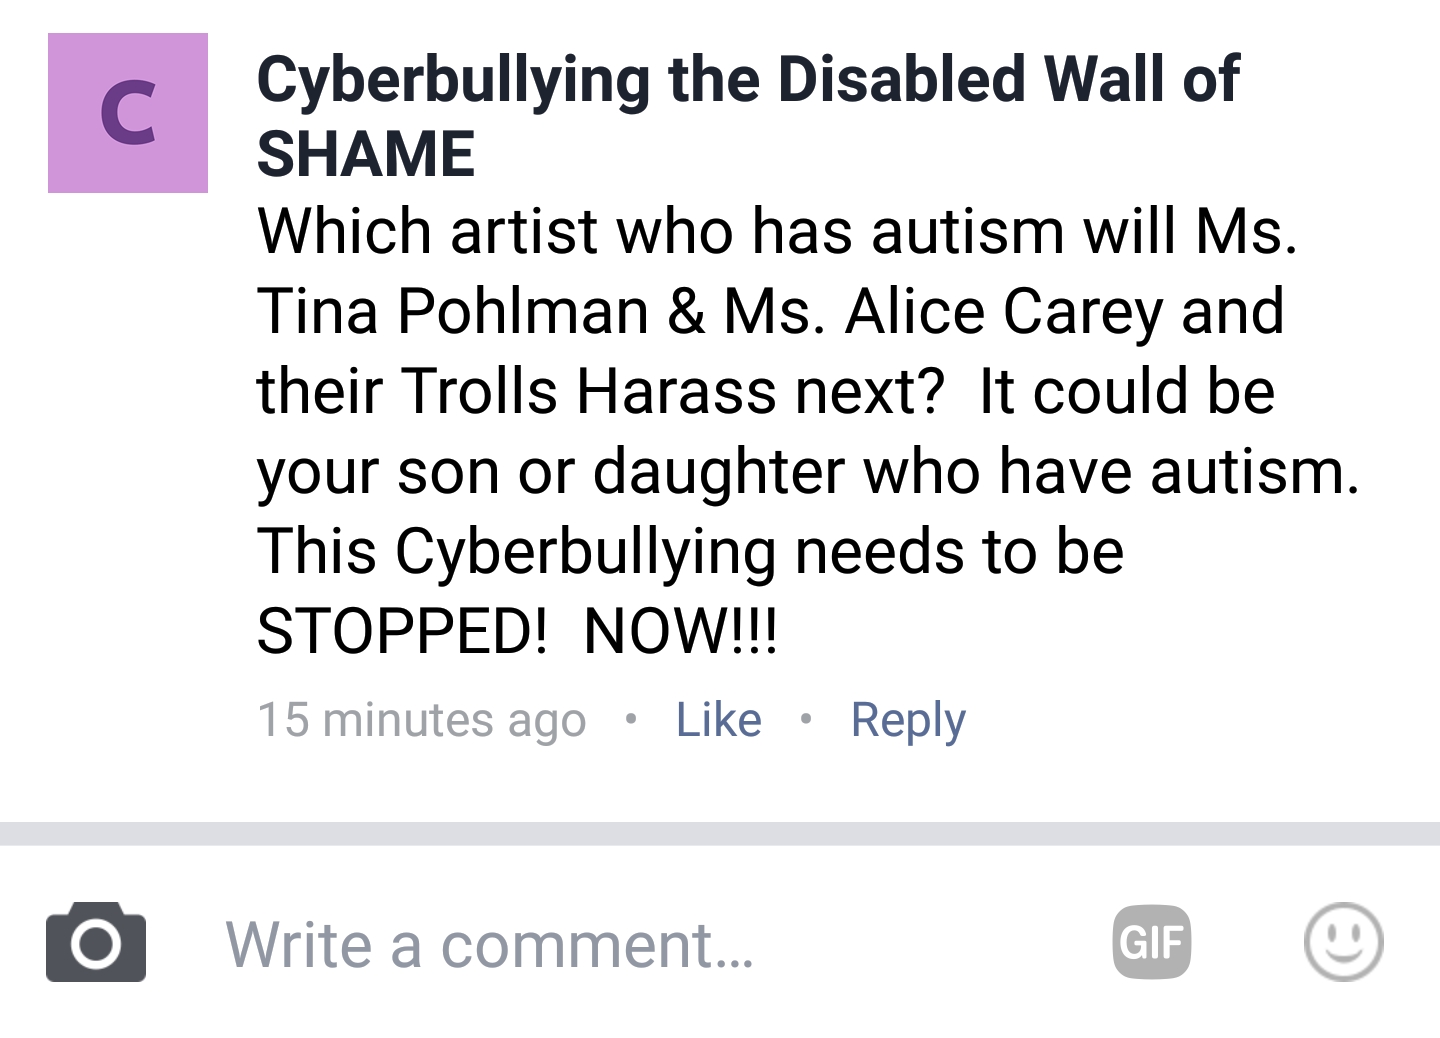 harassment to me by the Waters on one of their bully pages.